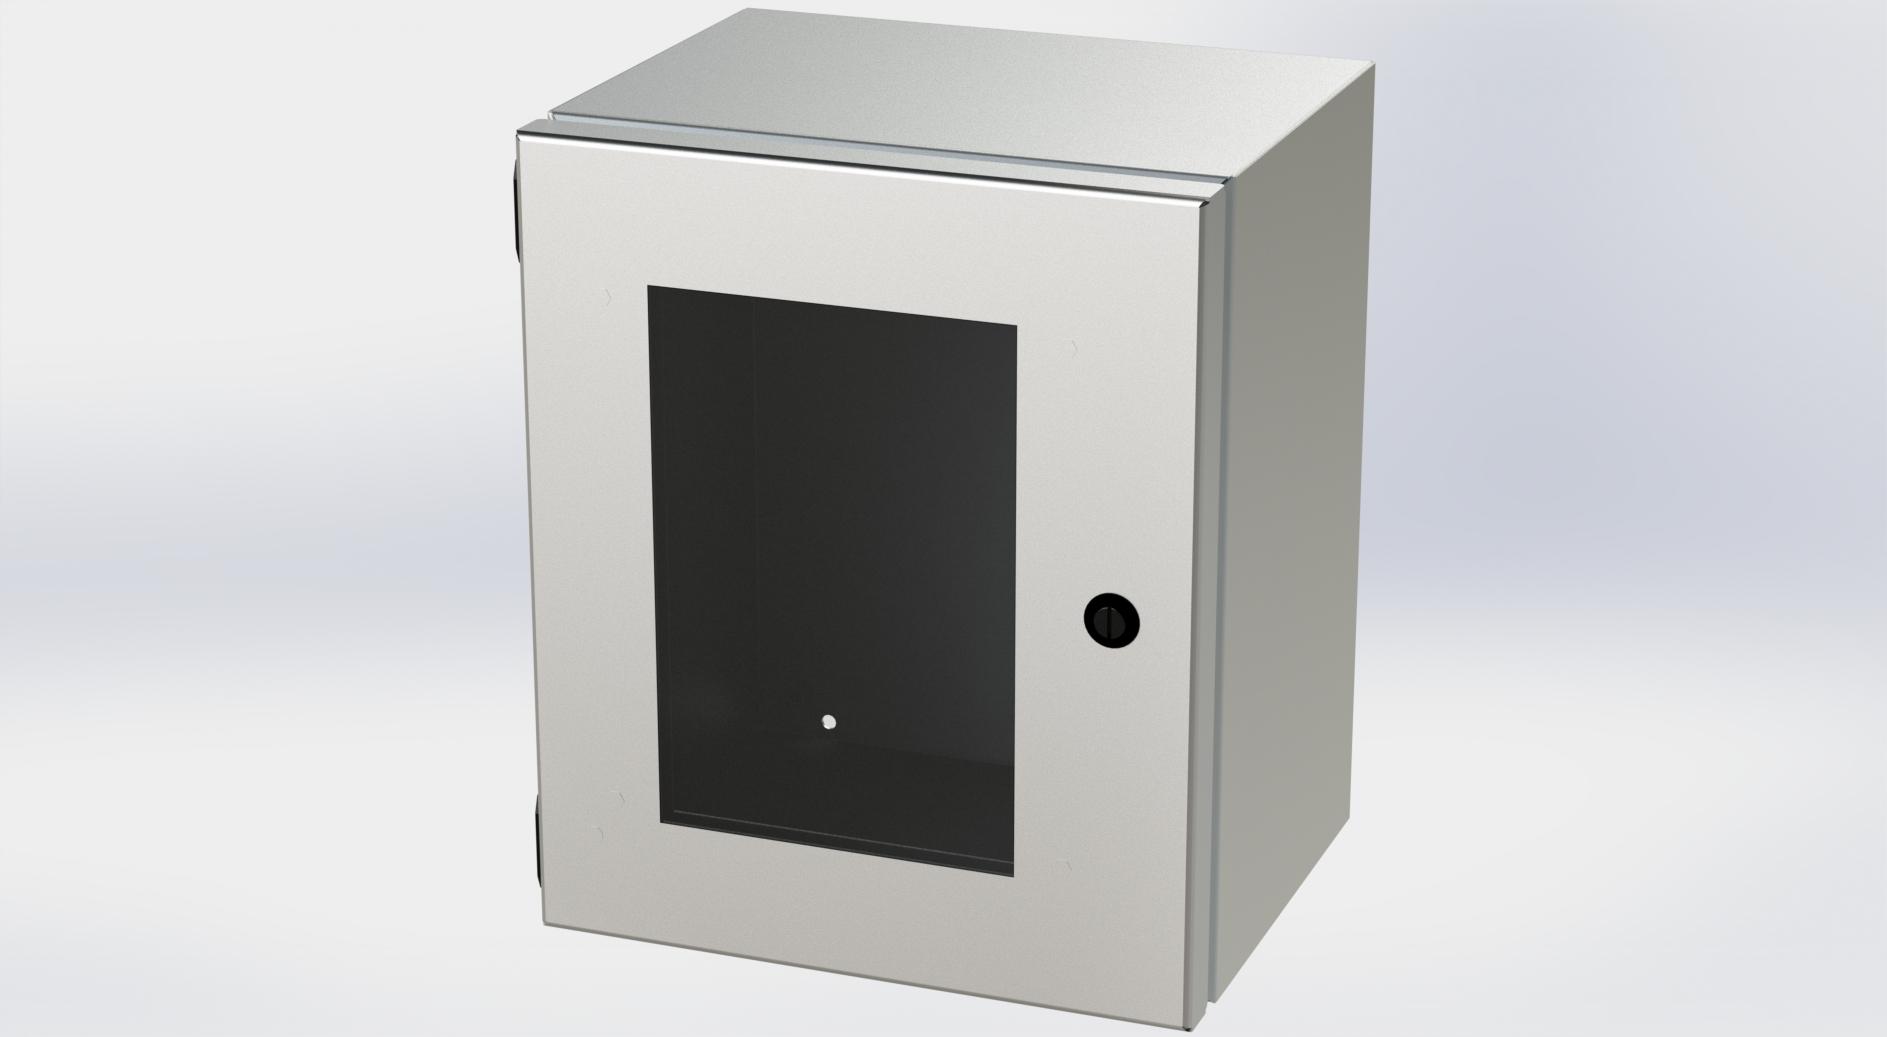 Saginaw Control SCE-12108ELJWSS6 S.S. ELJ Enclosure W/Viewing Window, Height:12.00", Width:10.00", Depth:8.00", #4 brushed finish on all exterior surfaces. Optional panels are powder coated white.